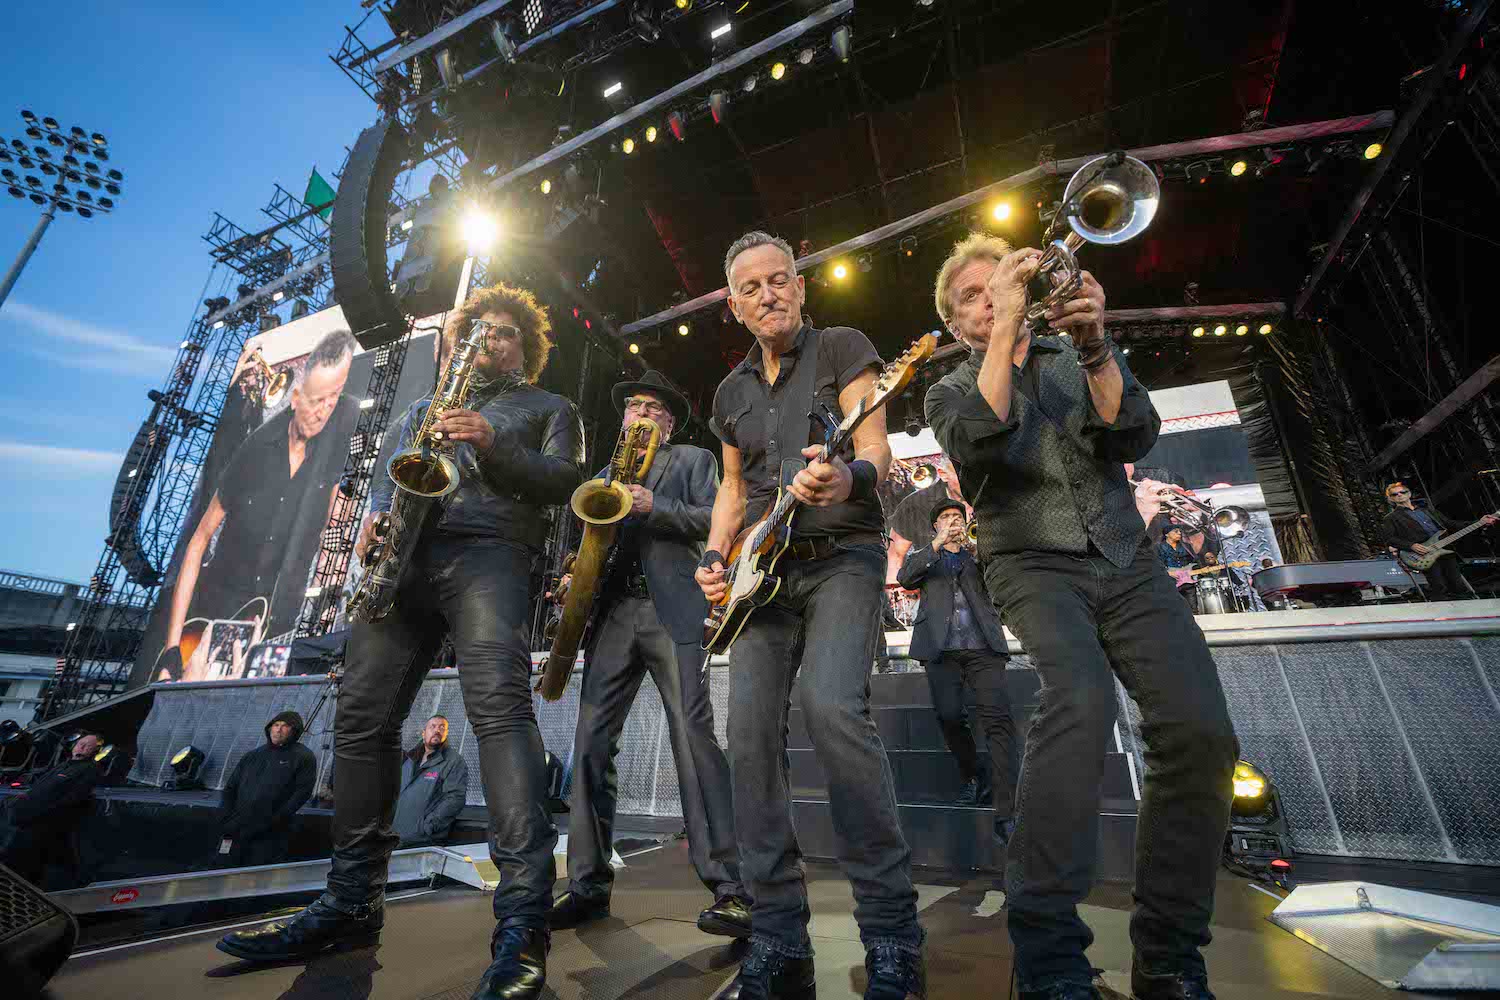 Bruce Springsteen & E Street Band at RDS Arena, Dublin, Ireland on May 9, 2023.